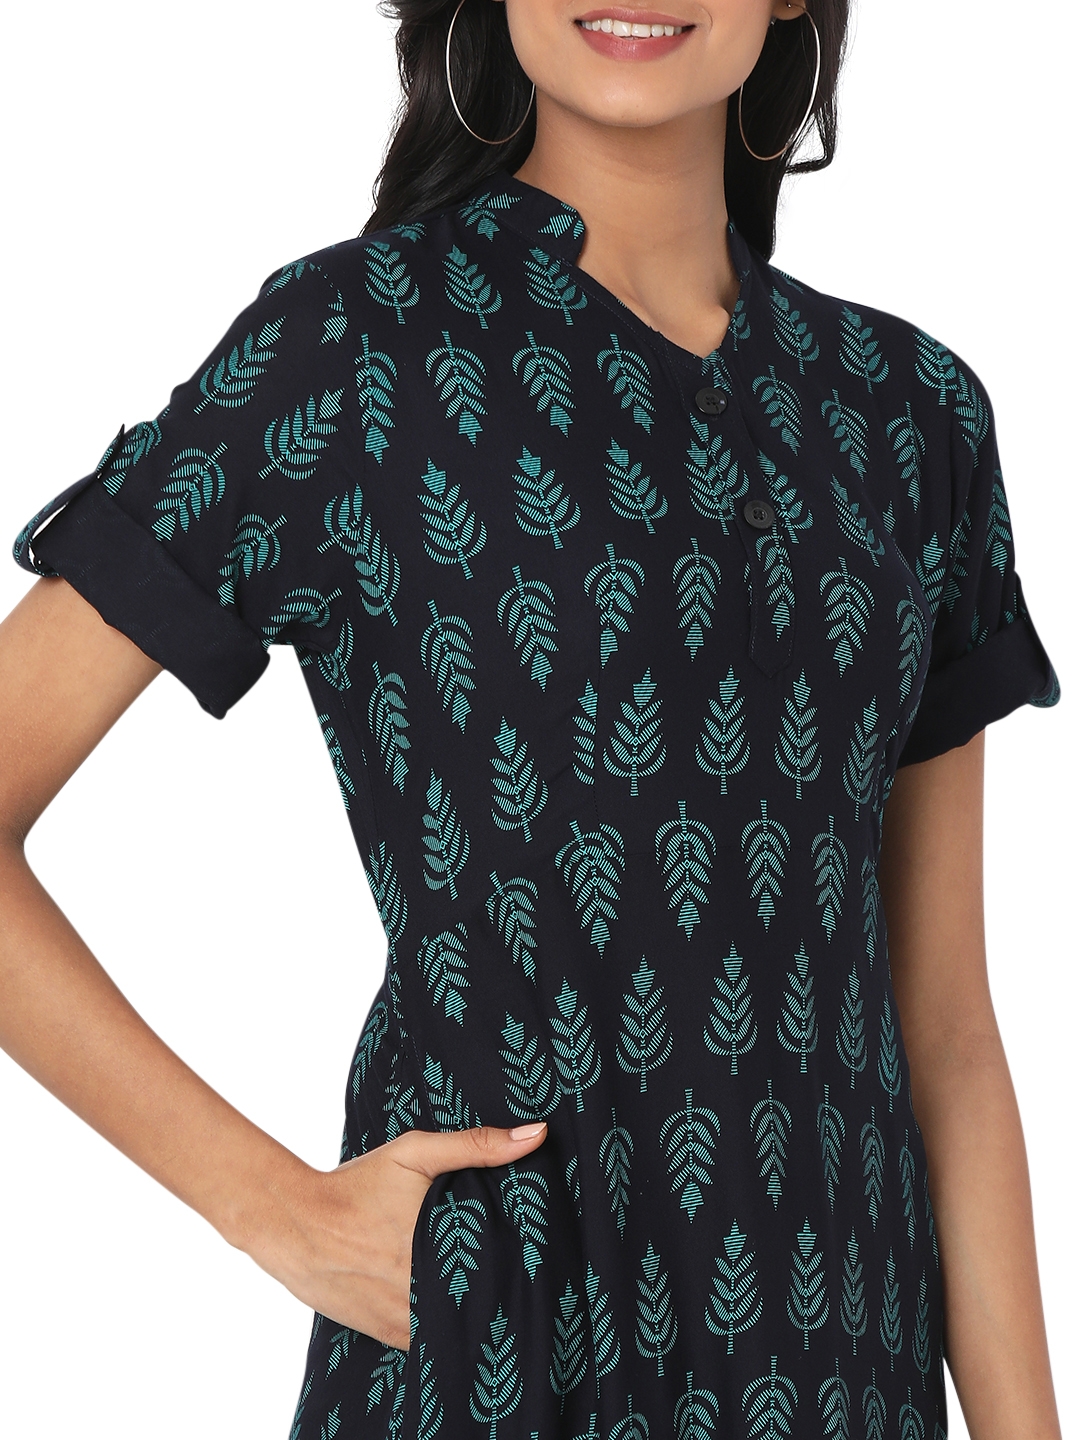 Smarty Pants | Smarty Pants women's cotton fabric green color alpine tree printed dress. 4